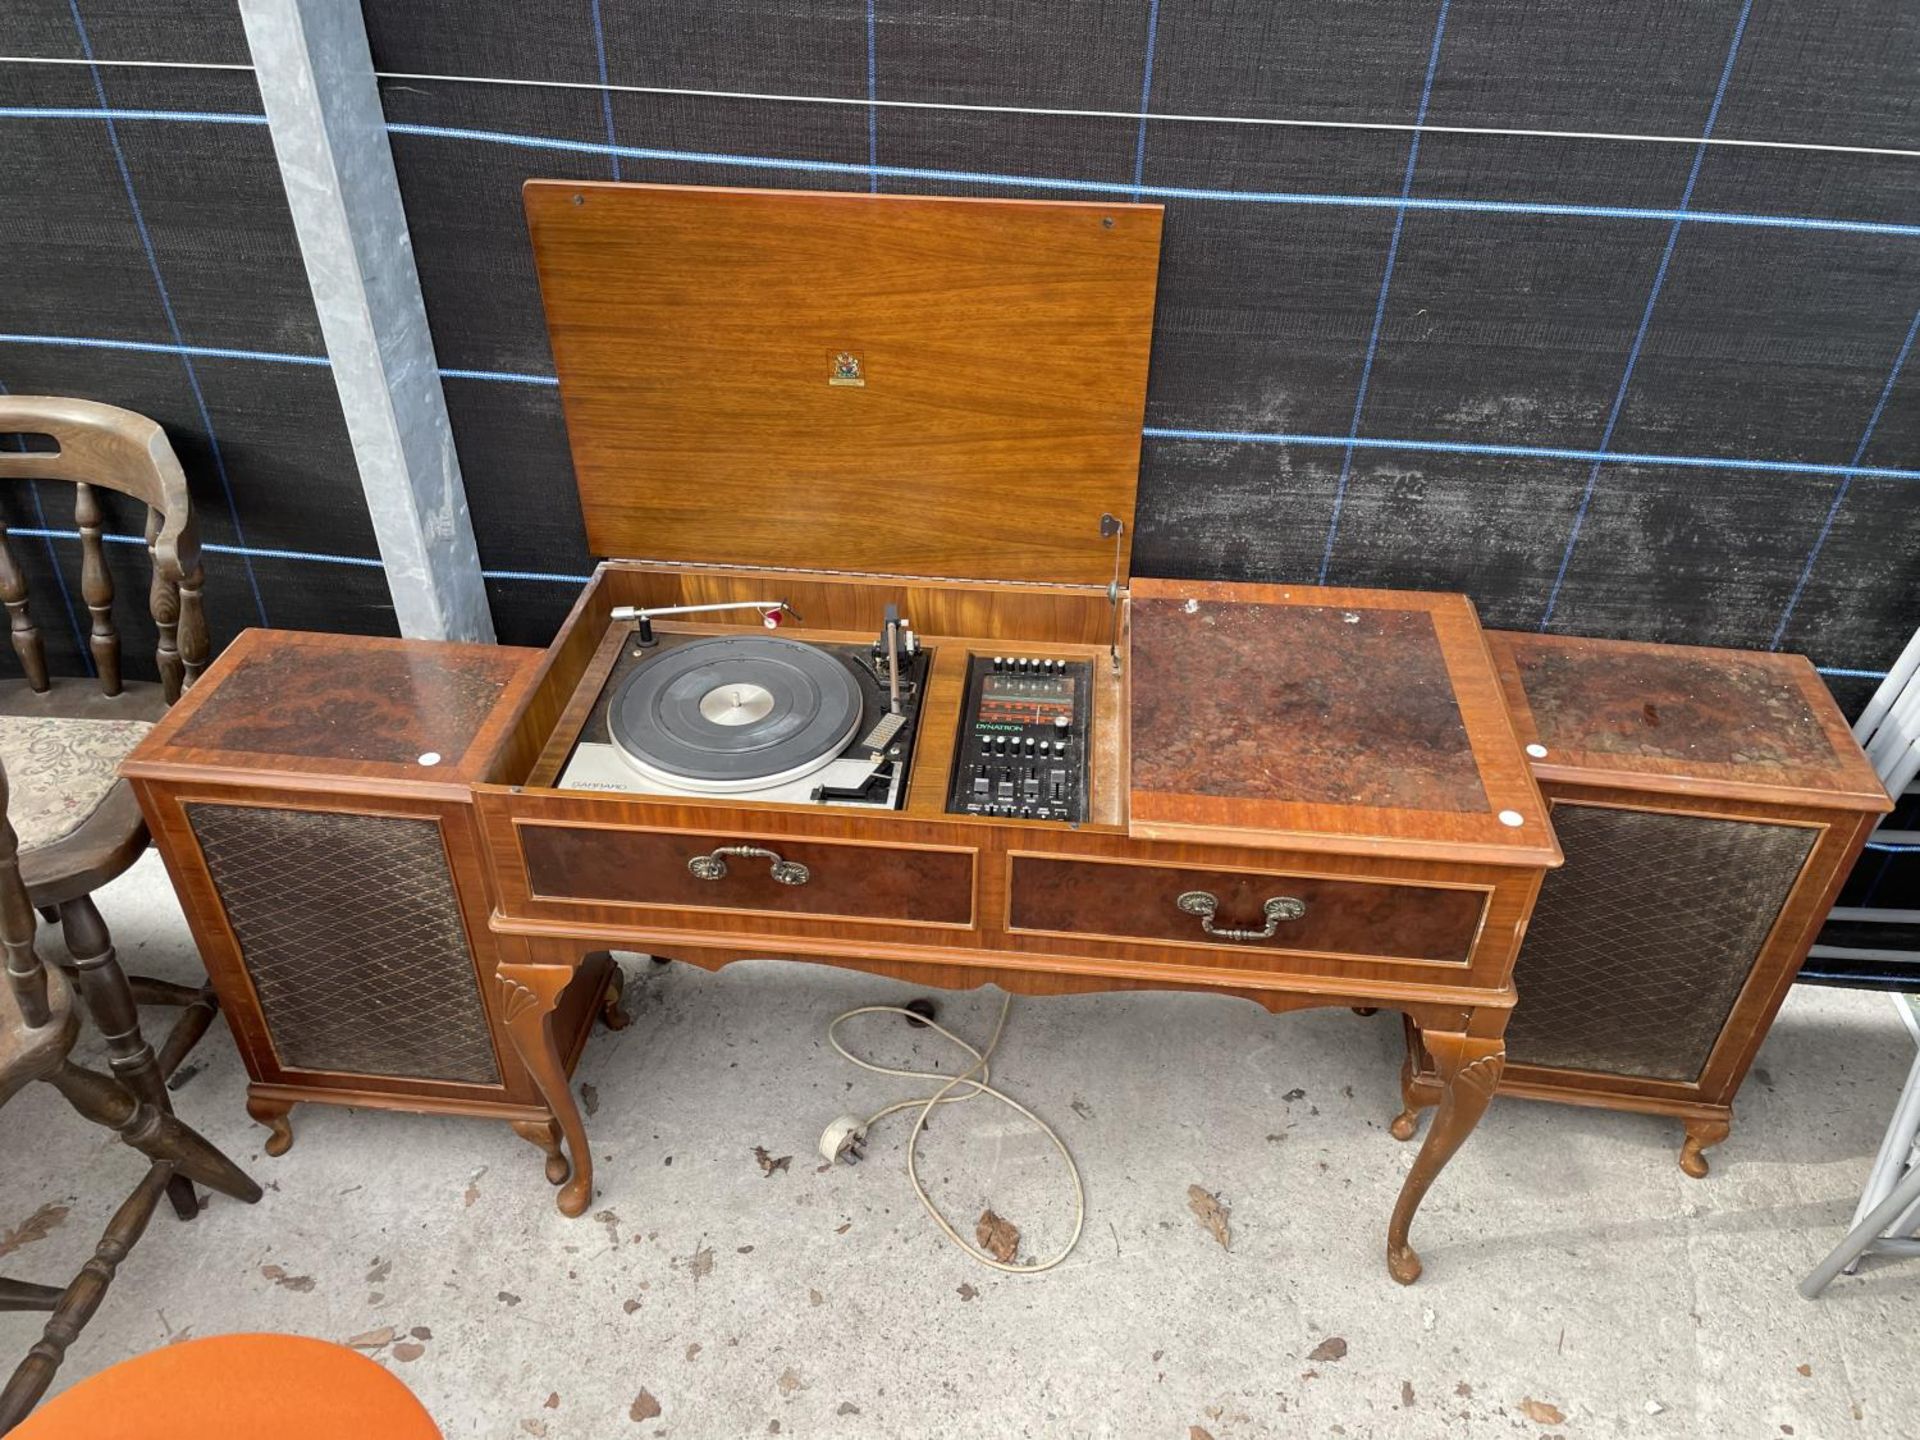 A DYNATRON YEW WOOD STEREO WITH GARRARD DECK COMPLETE WITH 2 SPEAKERS